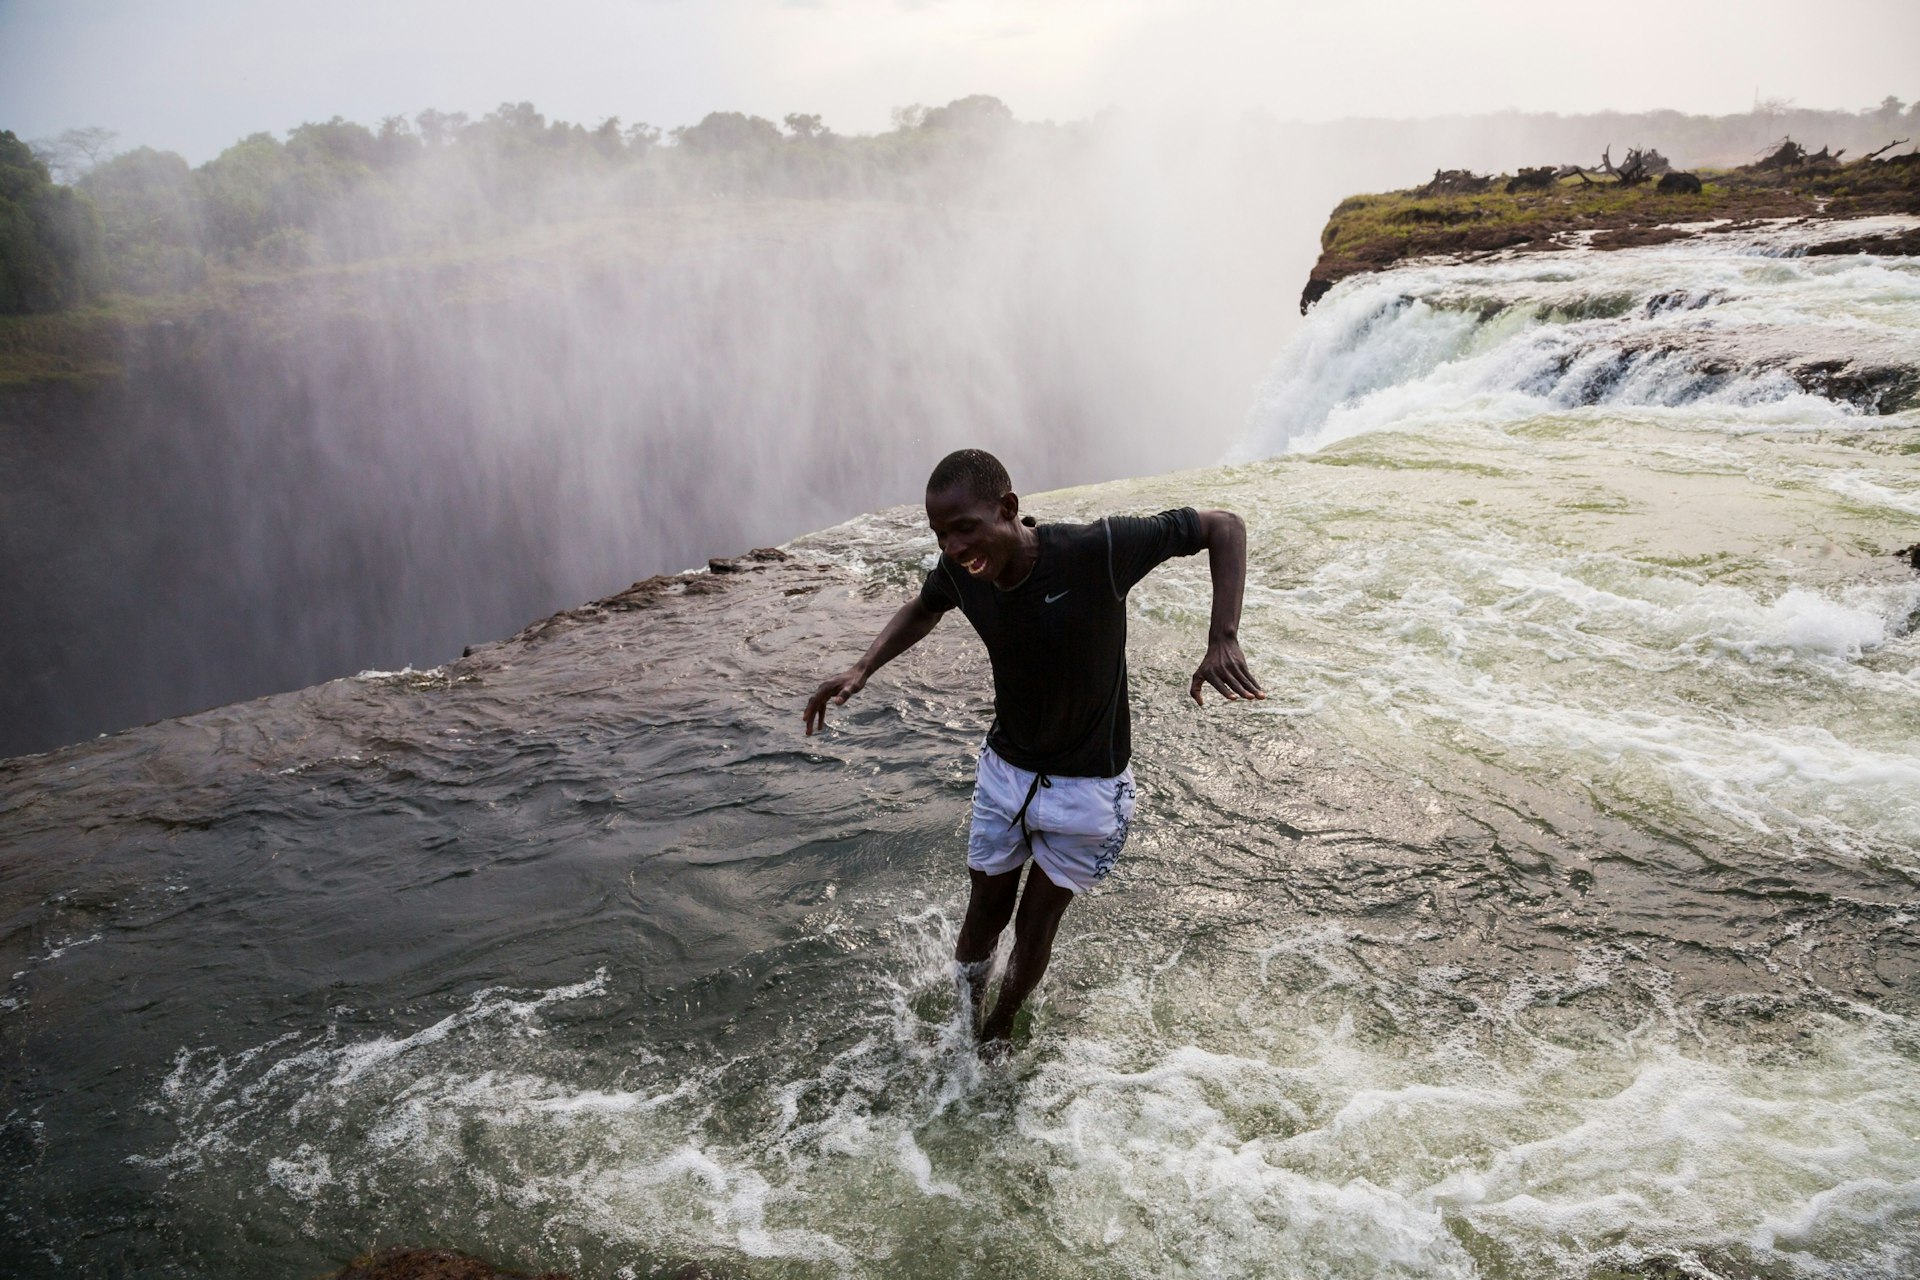 A man jumps into Devil's Pool in the Zambezi River at the top of Victoria Falls; a rim of rock creates the pool that stops swimmers from getting swept over the falls.